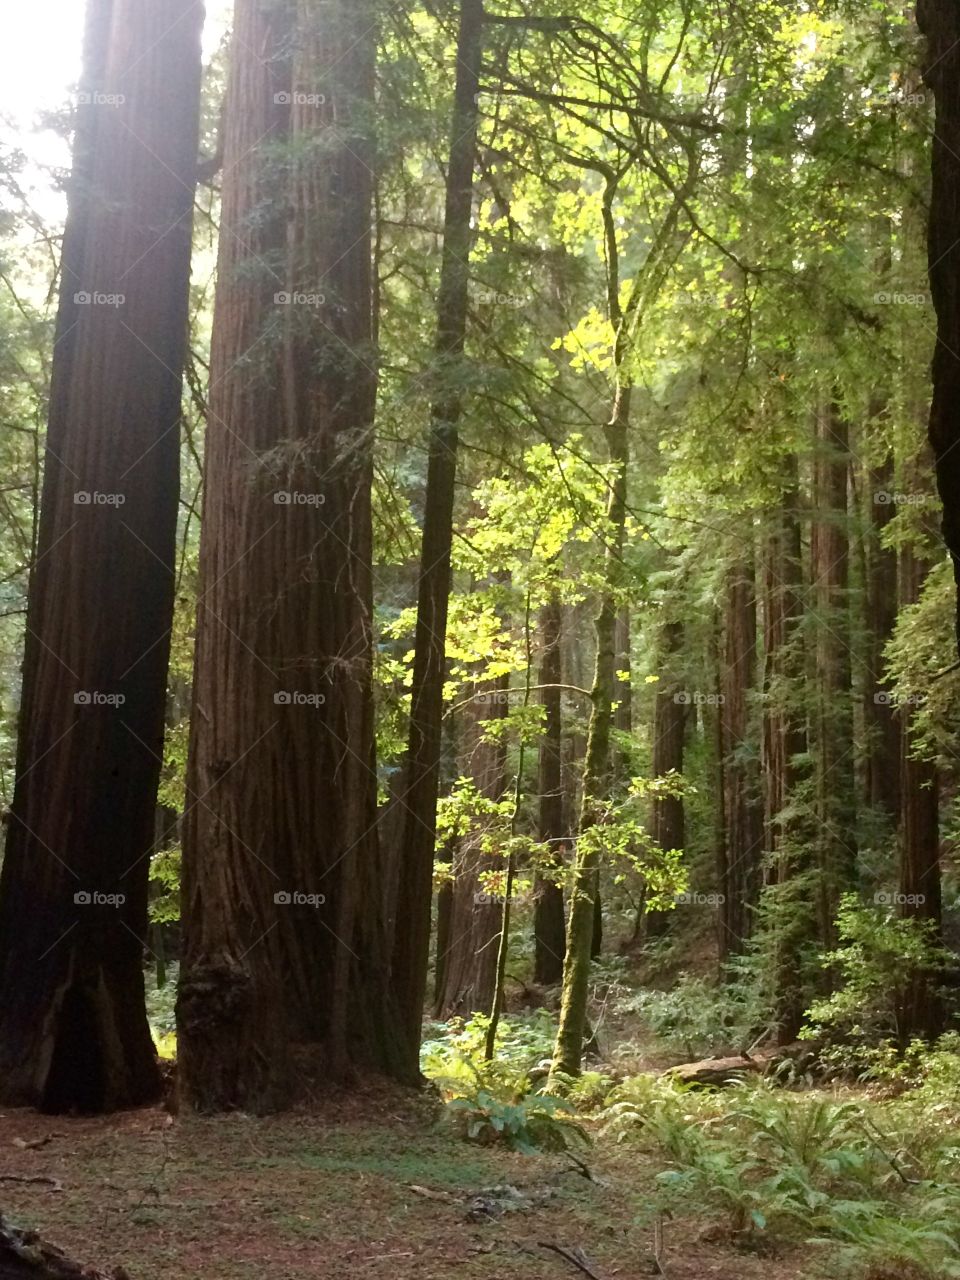 Enchanted trees . Redwoods